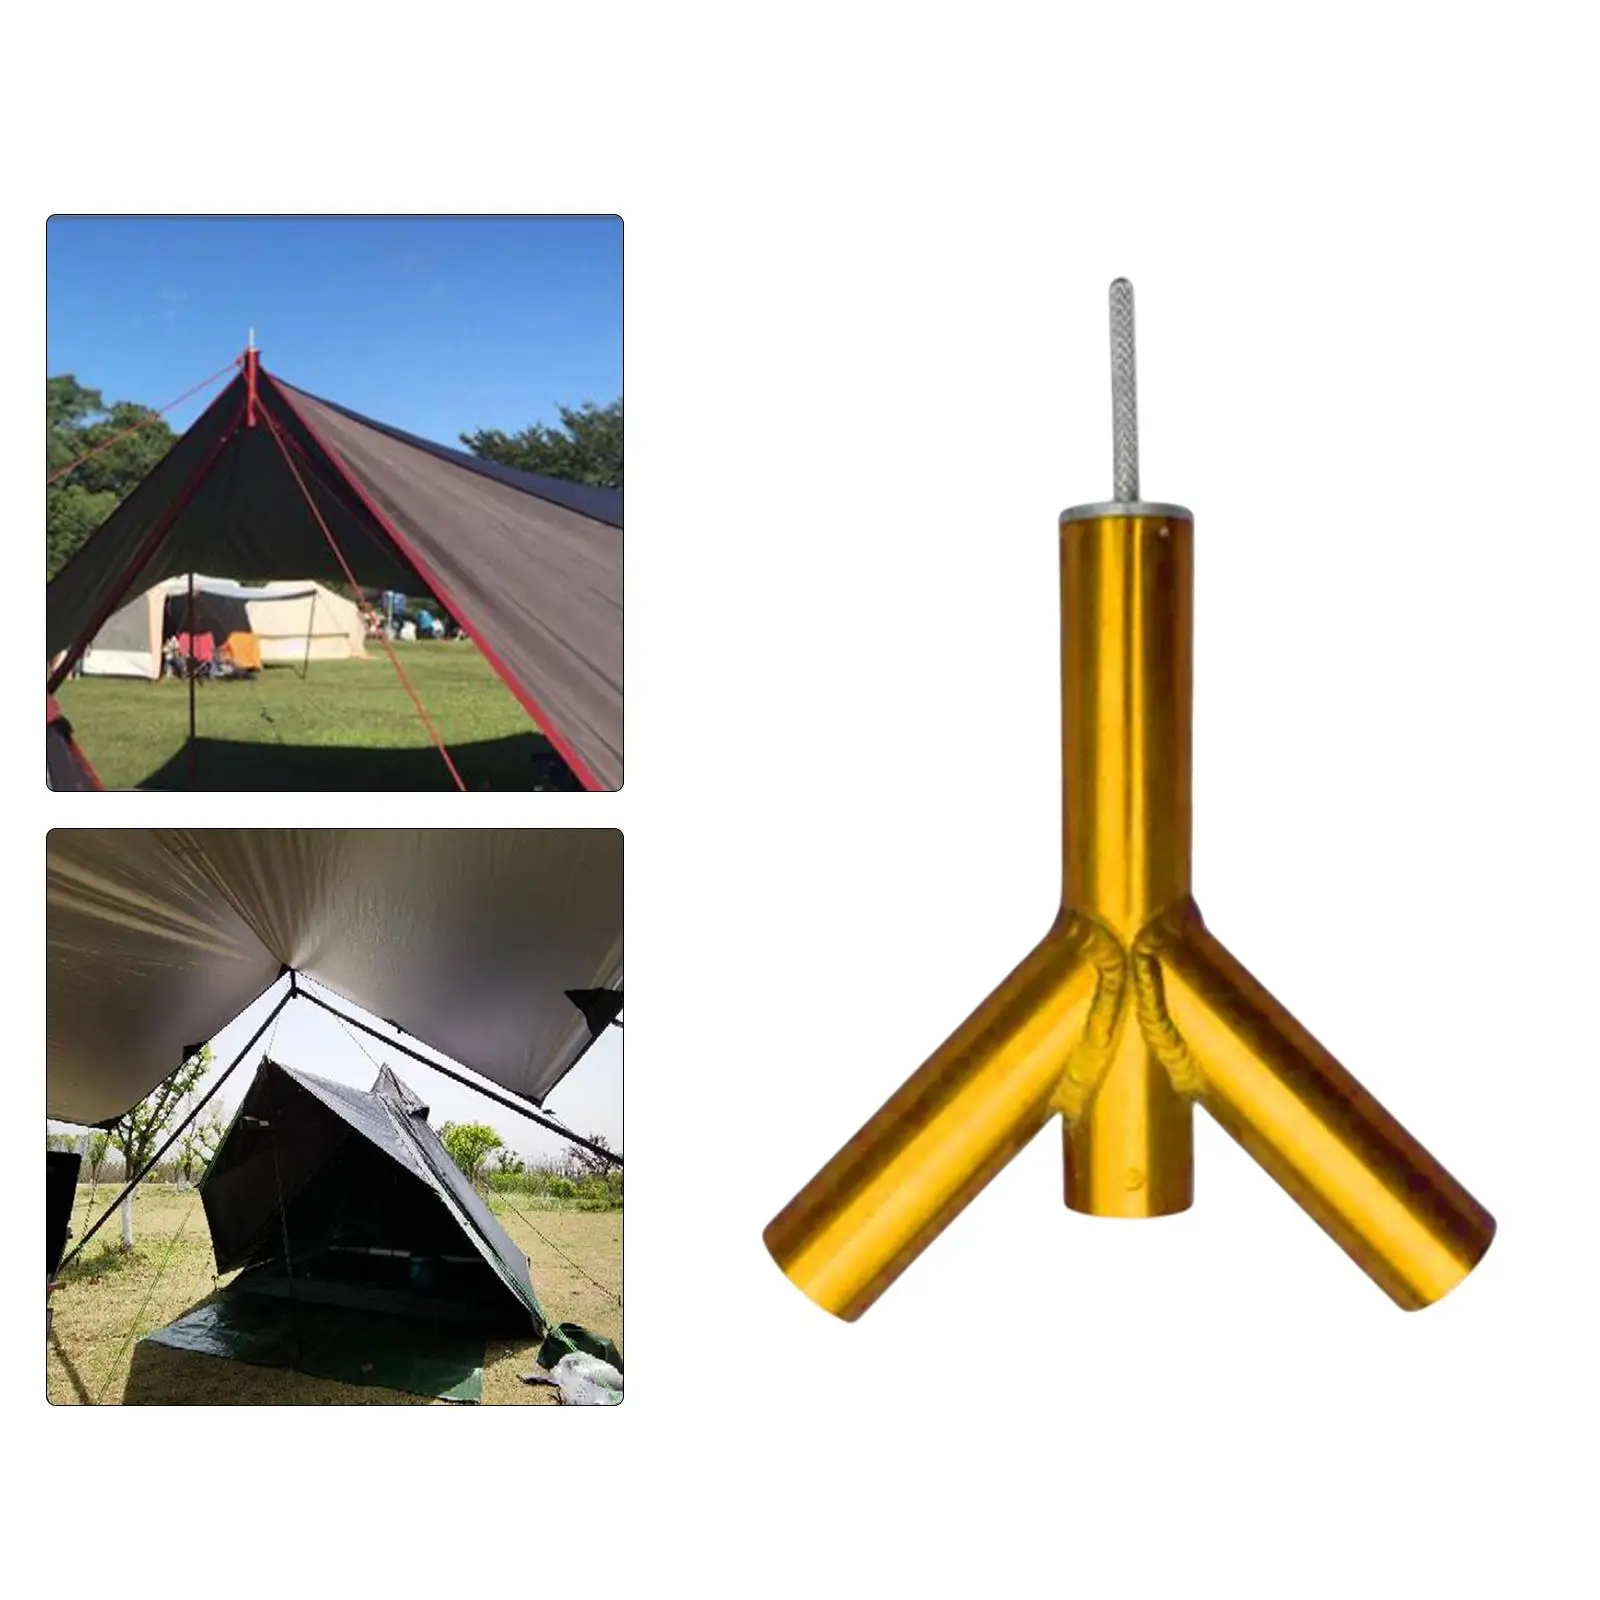 Lightweight Camping Tent Tarp Poles Canopy Awning Rod Shelters Stand Stick for Bimodal Tent Sunshade for Indian Tent Tent Fly